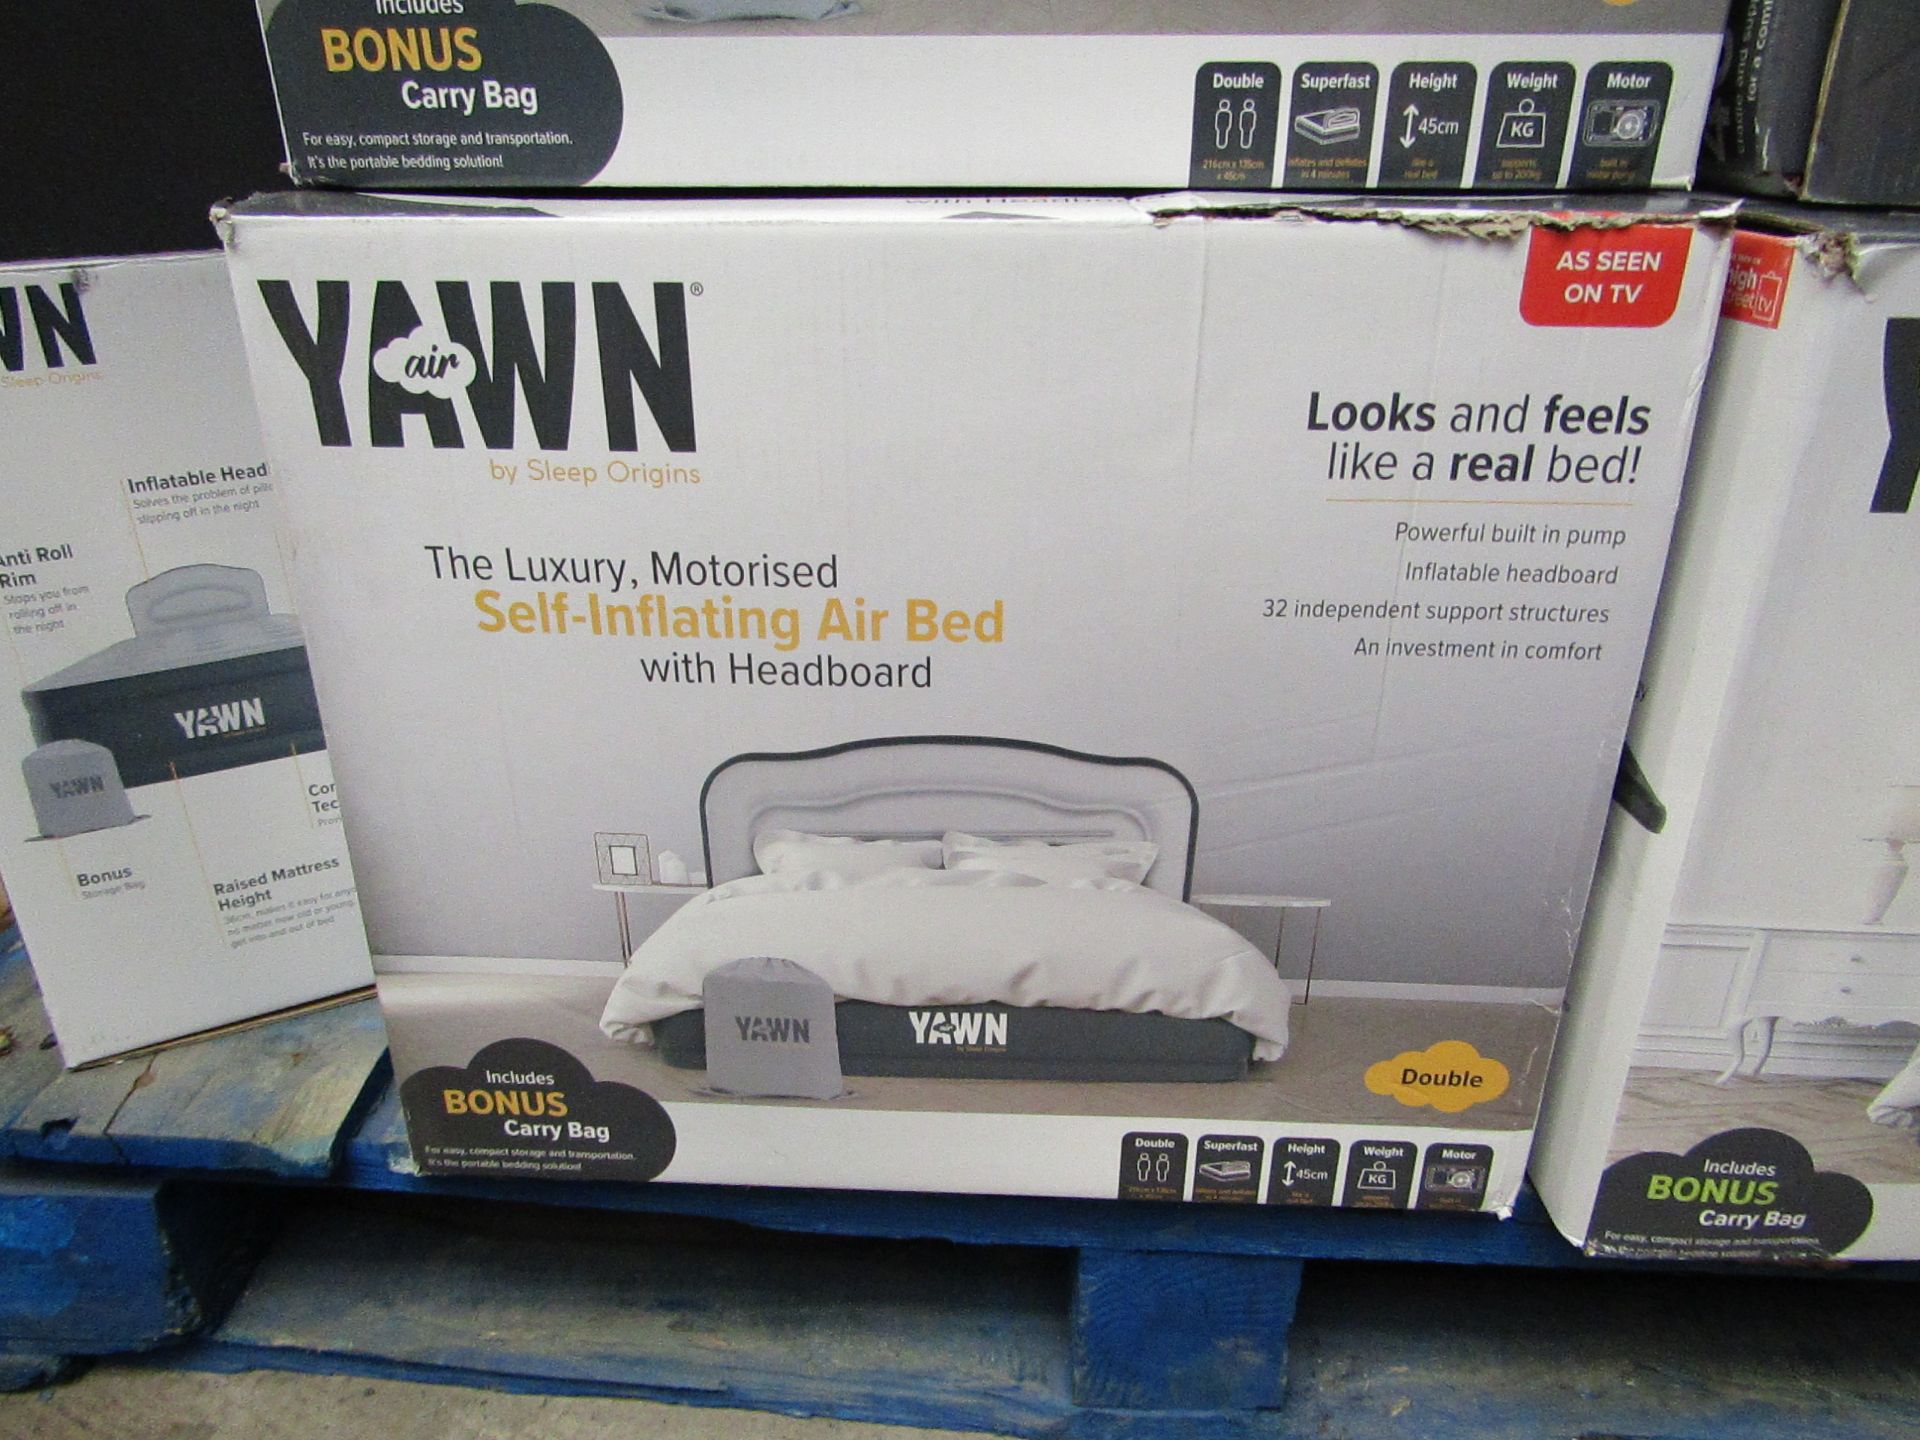 Yawn self-inflating air bed with headboard, size double, unchecked and boxed. RRP £69.99 at Argos,